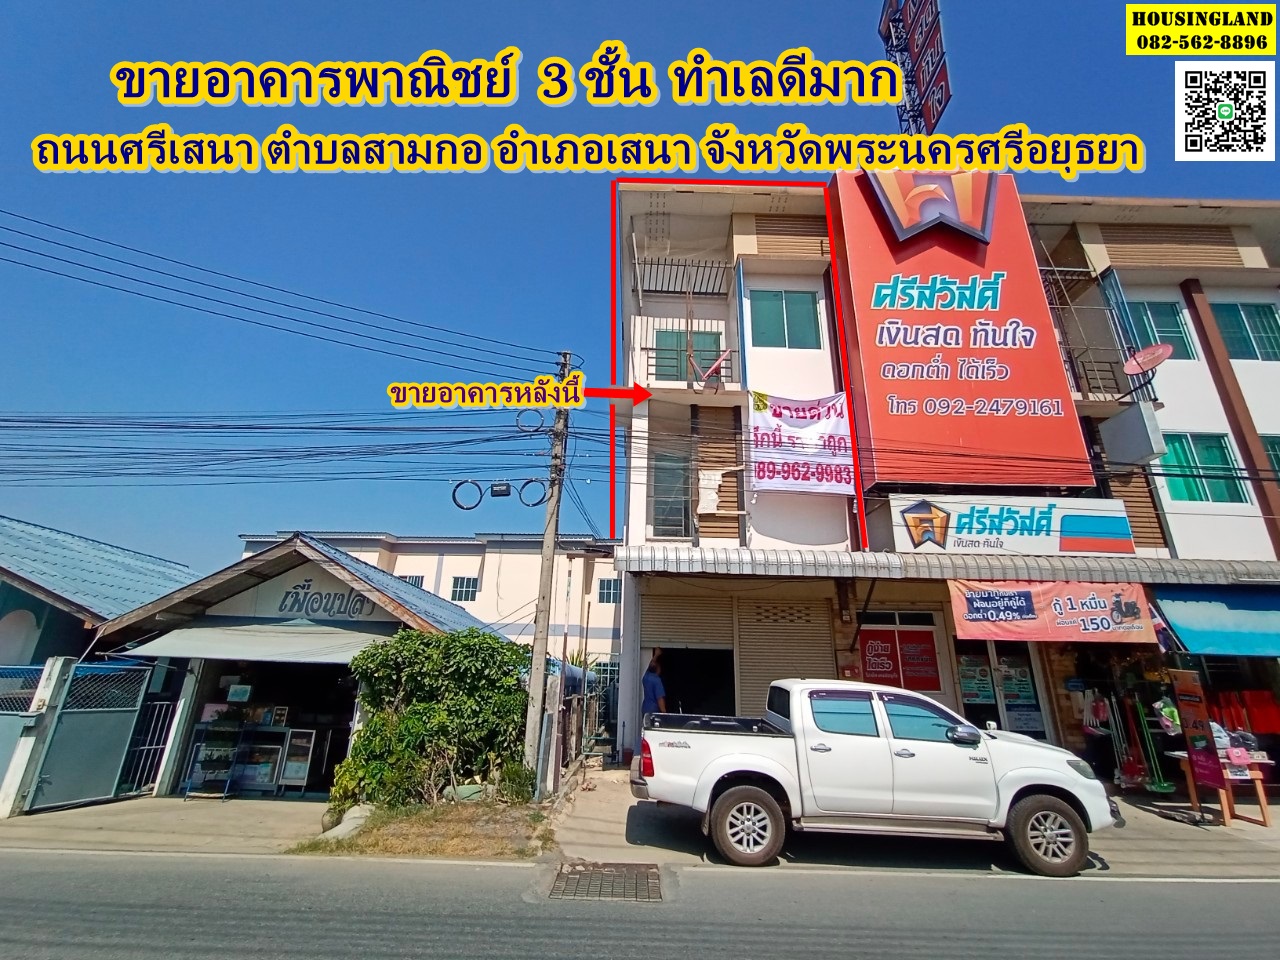 3 storey commercial building for sale, very good location, Sam Ko Subdistrict, Sena District, Phra Nakhon Si Ayutthaya Province